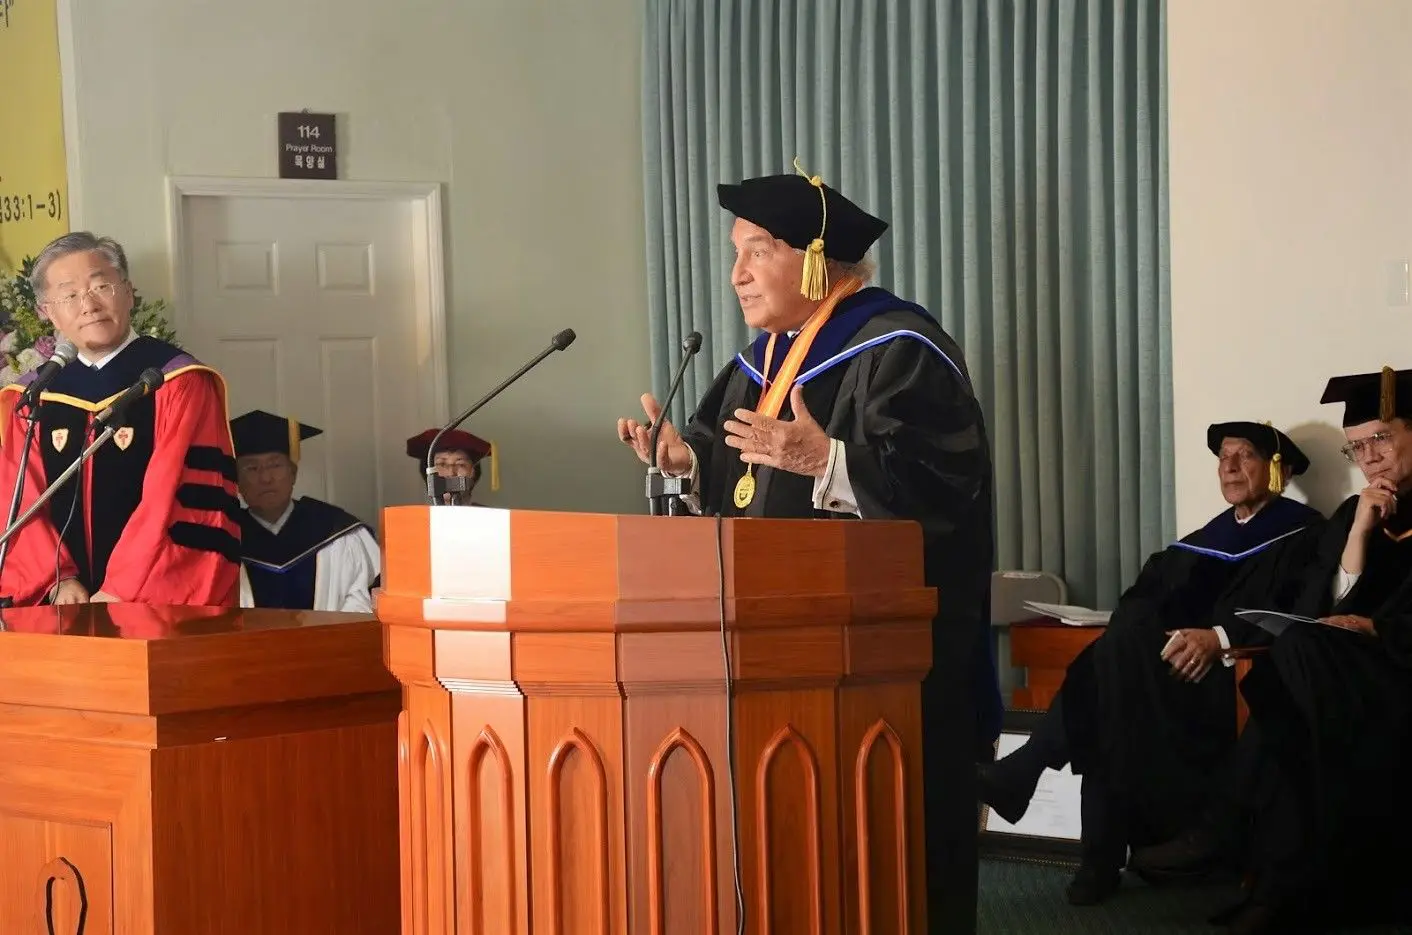 A man in graduation robes is speaking at a podium.